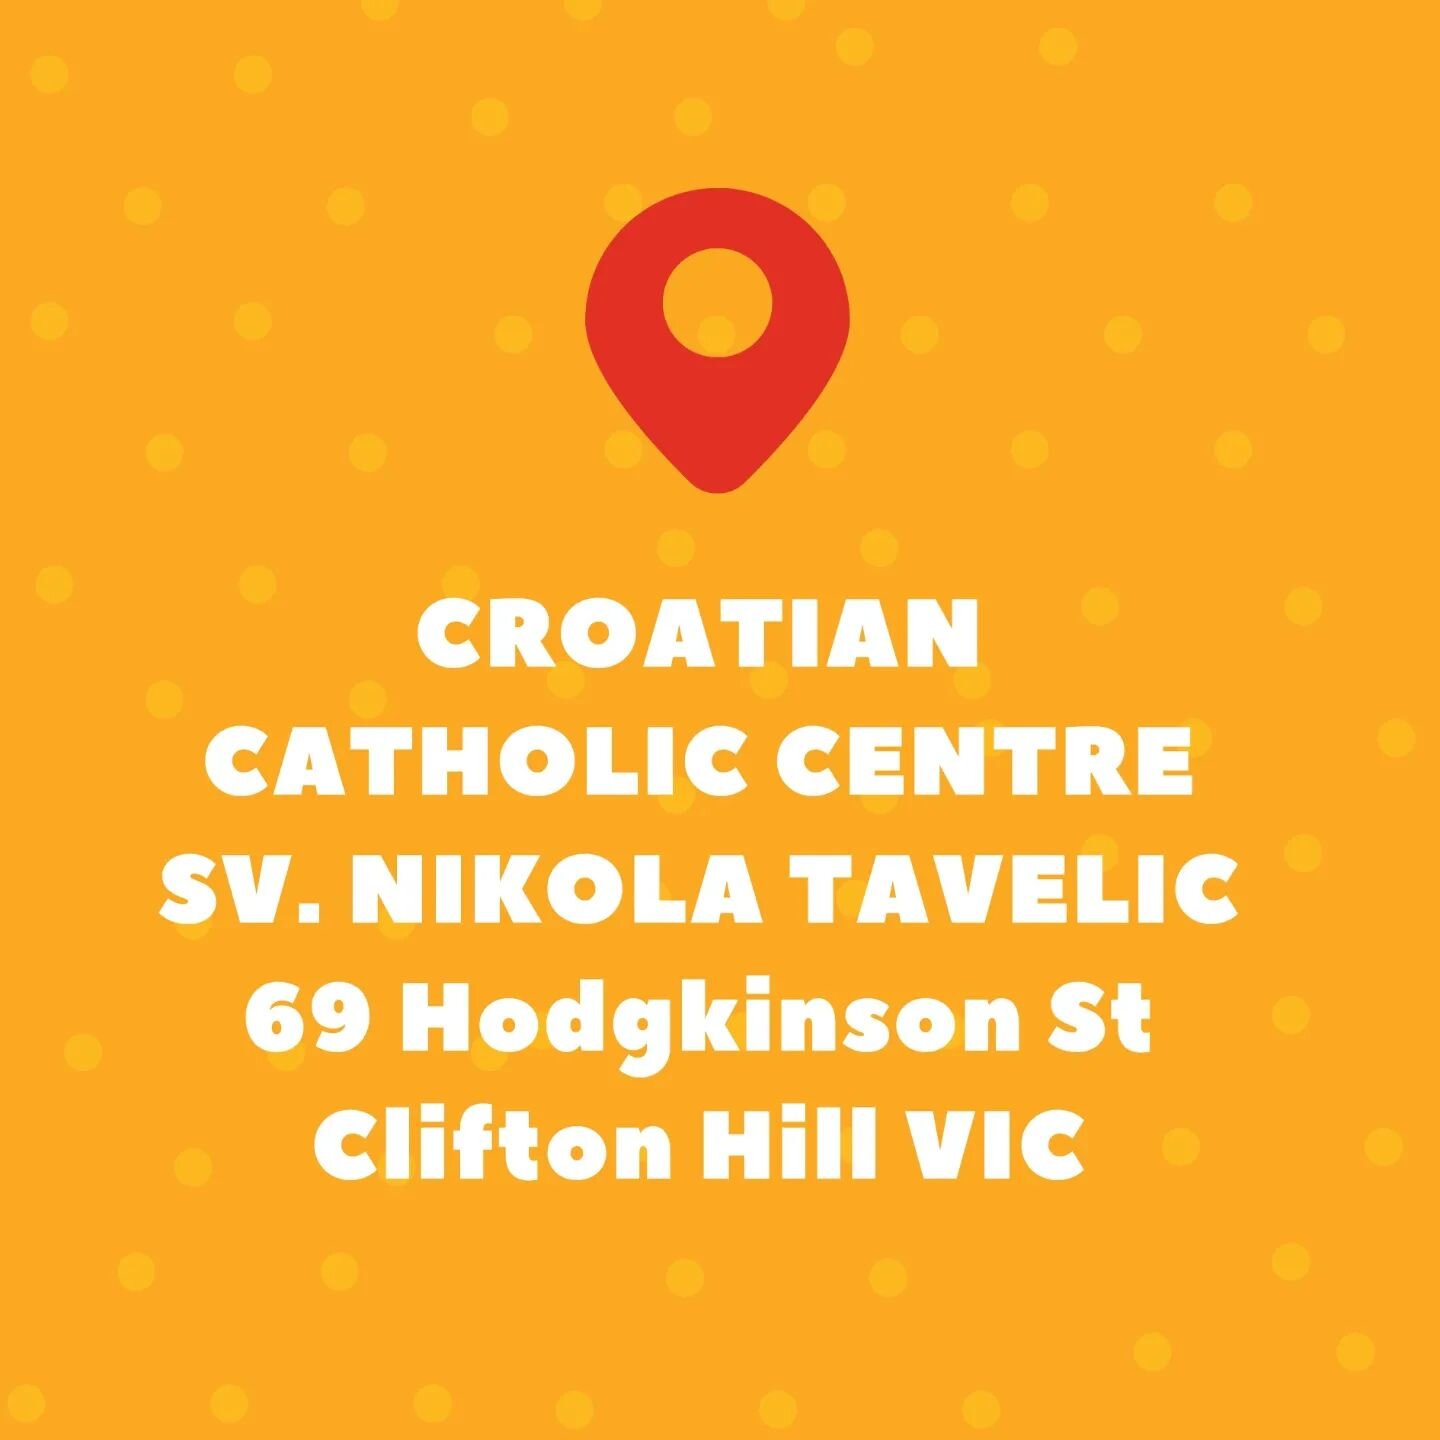 This is where it all began. In 1978, the late Father Josip Kasić, who was the Parish priest of Saint Nikola Tavelić&nbsp;church in Clifton Hill, had an idea to start a Croatian folkloric group as a way to bring the Croatian youth of Melbourne togethe